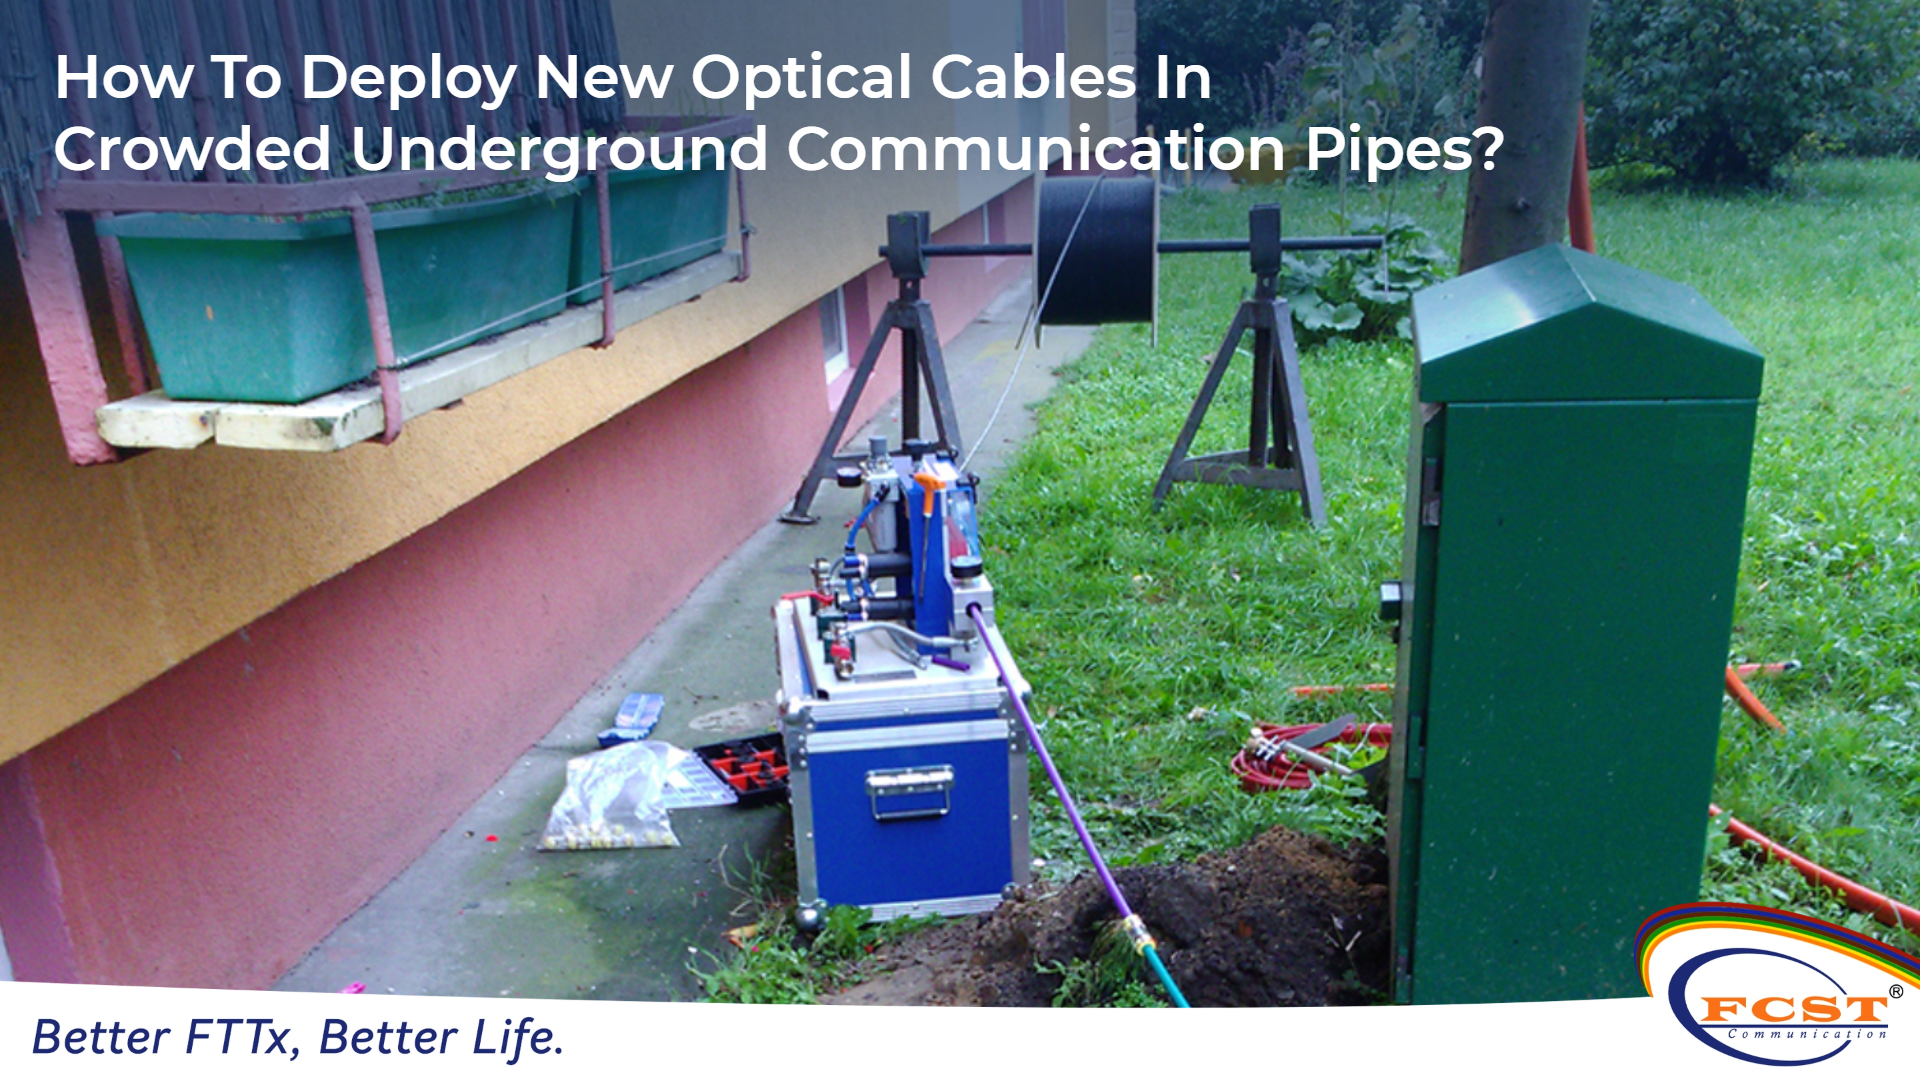 How To Deploy New Optical Cables In Crowded Underground Communication Pipes?